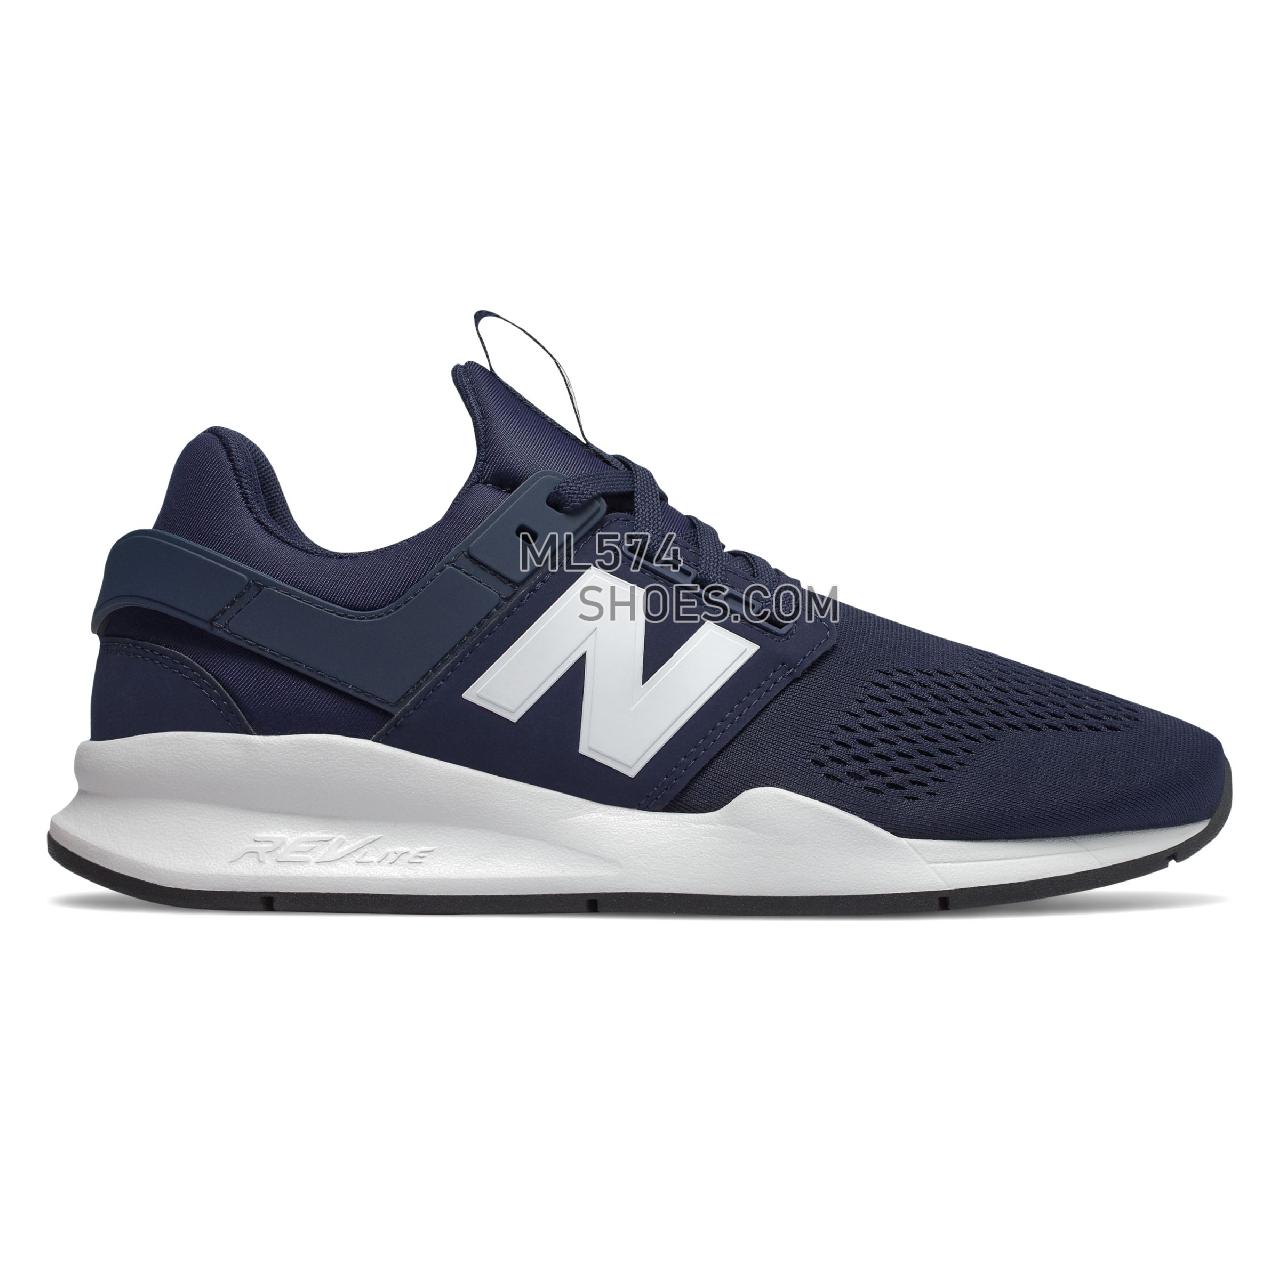 New Balance 247 - Men's 247 - Classic Pigment with White Munsell - MS247EN